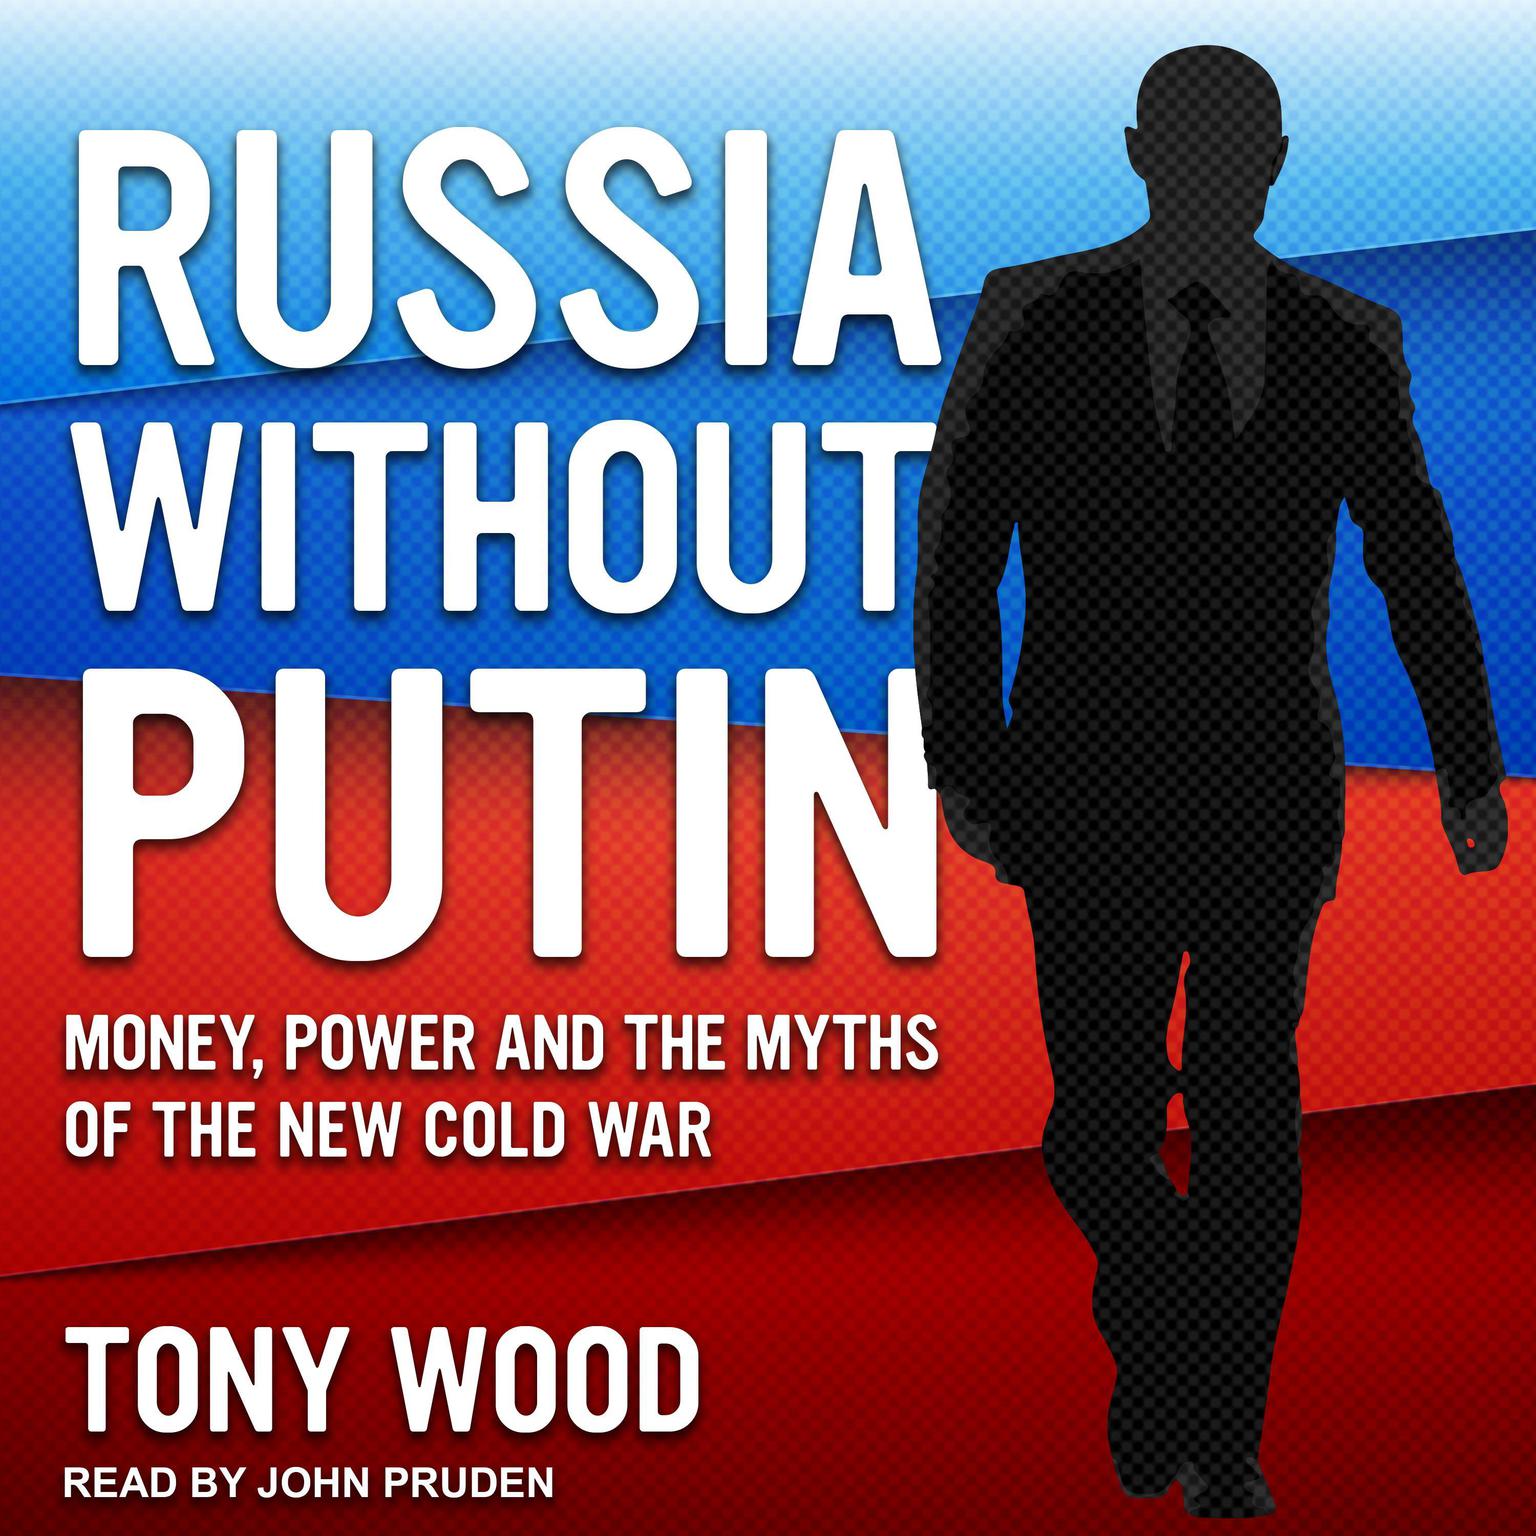 Russia Without Putin: Money, Power and the Myths of the New Cold War Audiobook, by Tony Wood